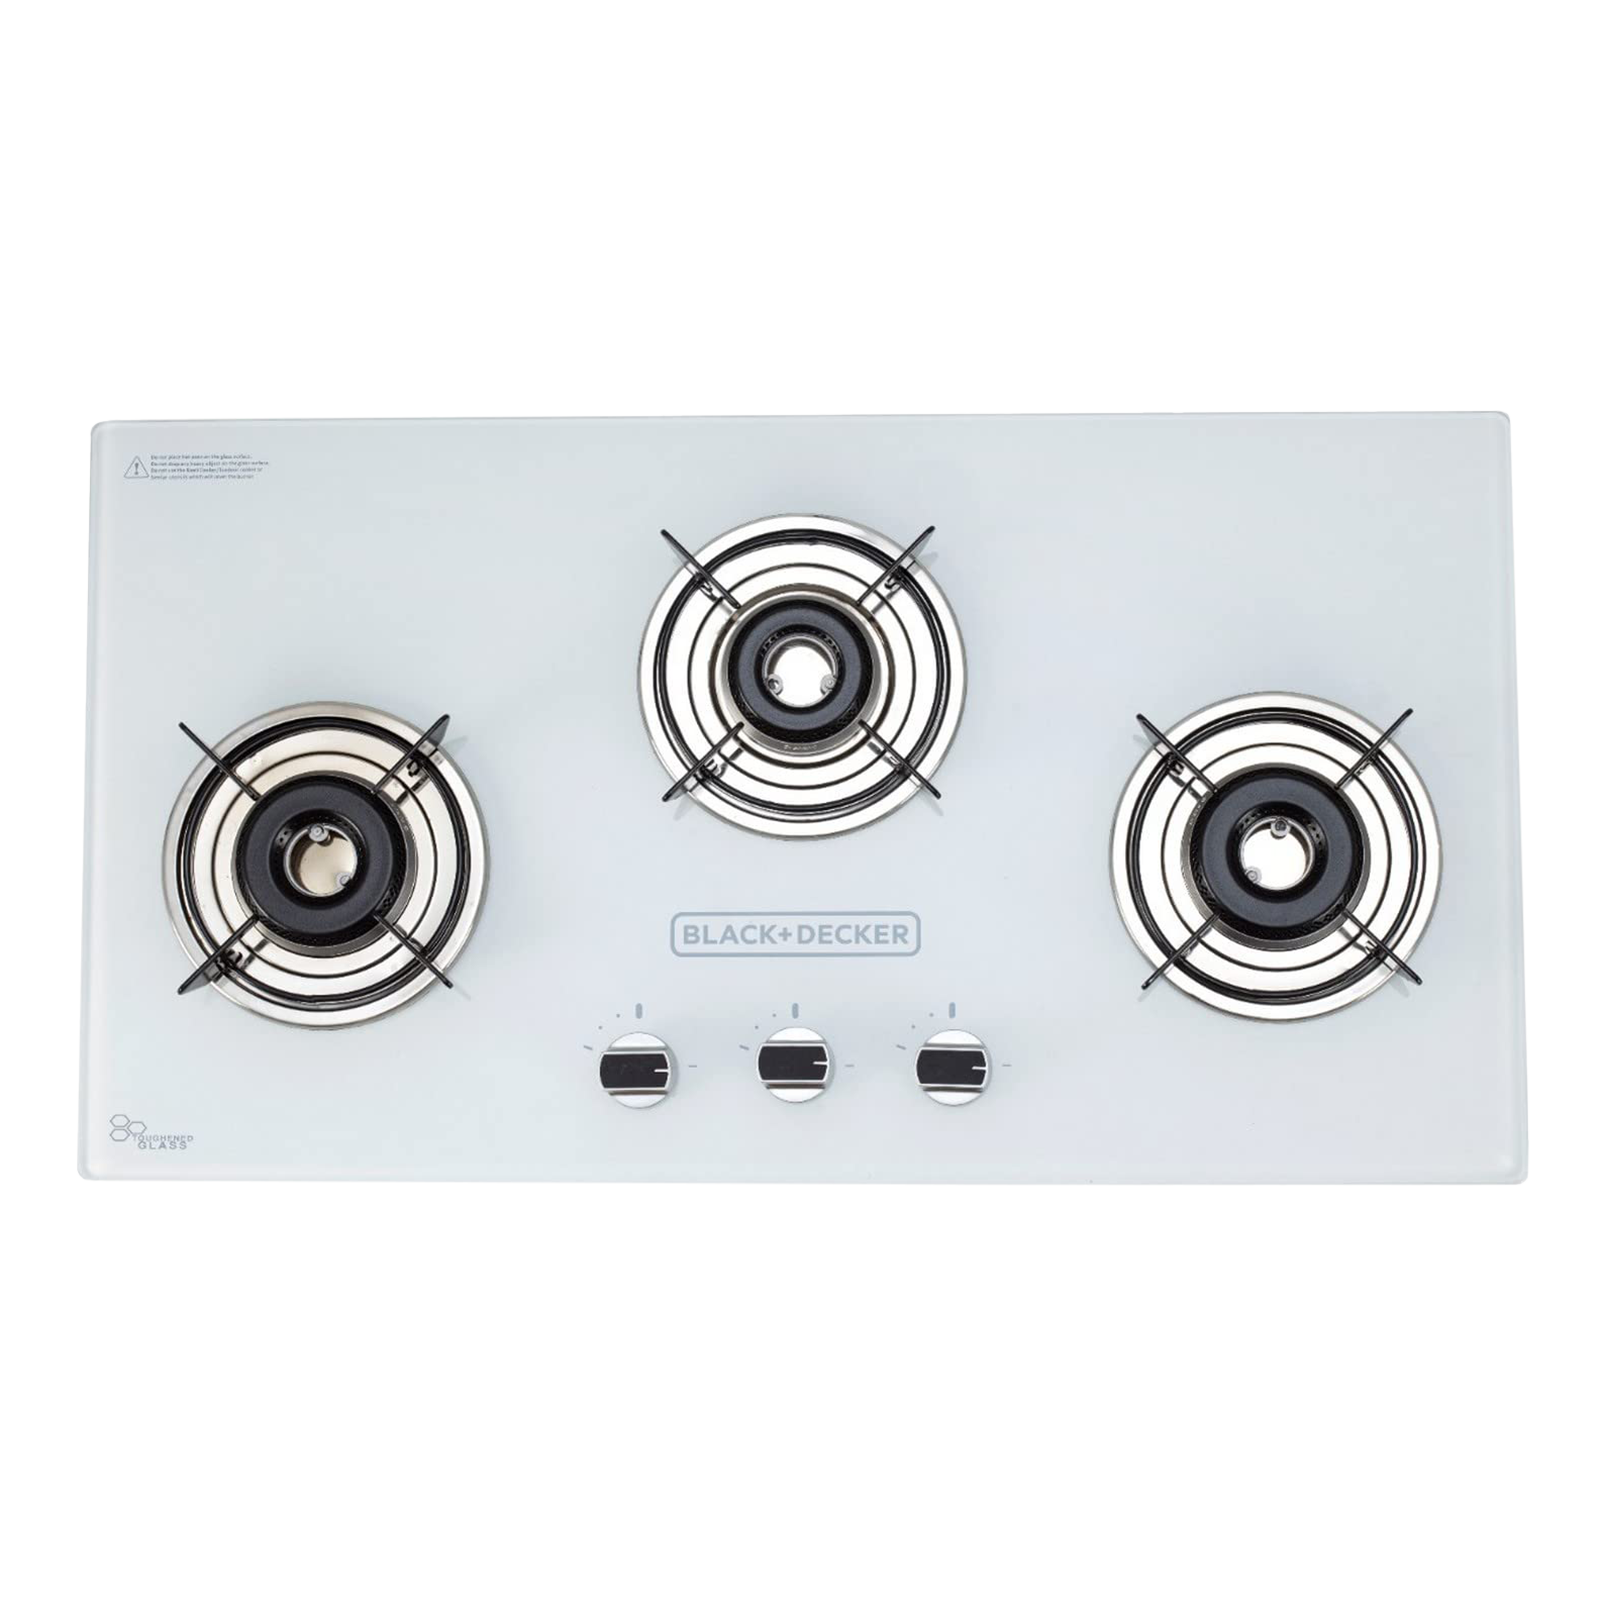 Black & Decker Toughened Glass Top 3 Burner Automatic Gas Stove (Skid-Proof Legs, White)